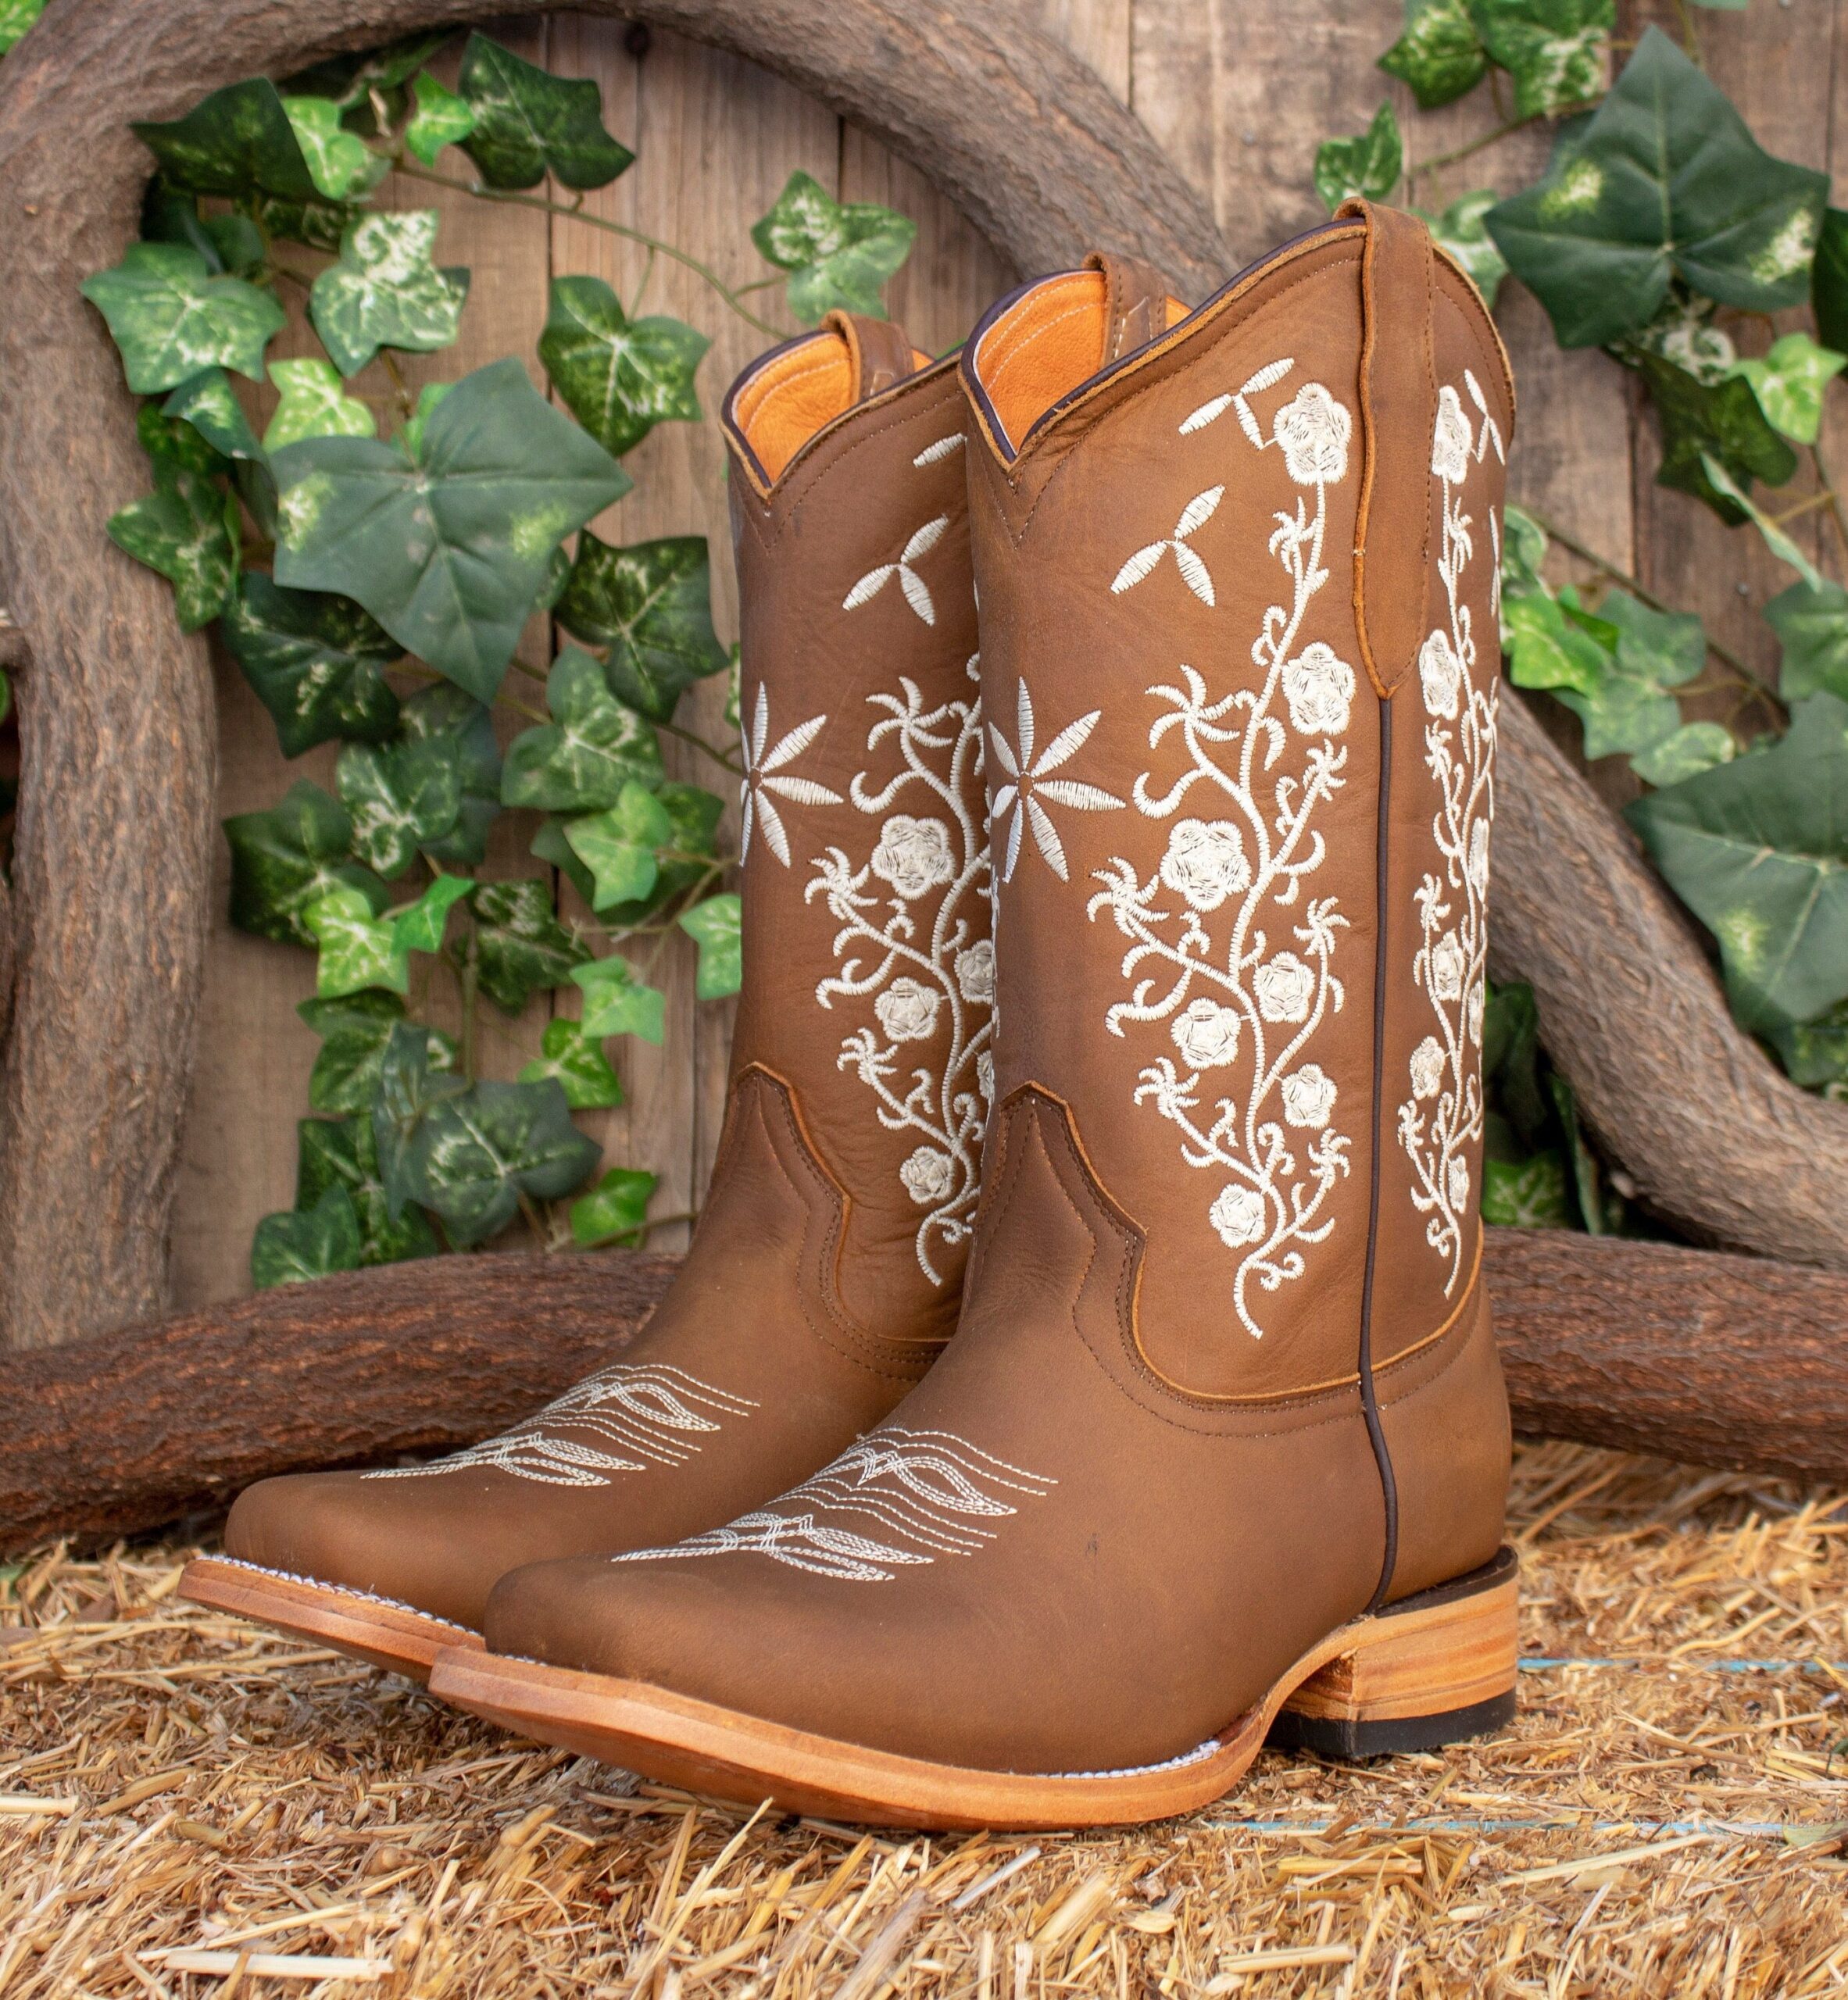 Styling
Up Cowgirl Boots For Women